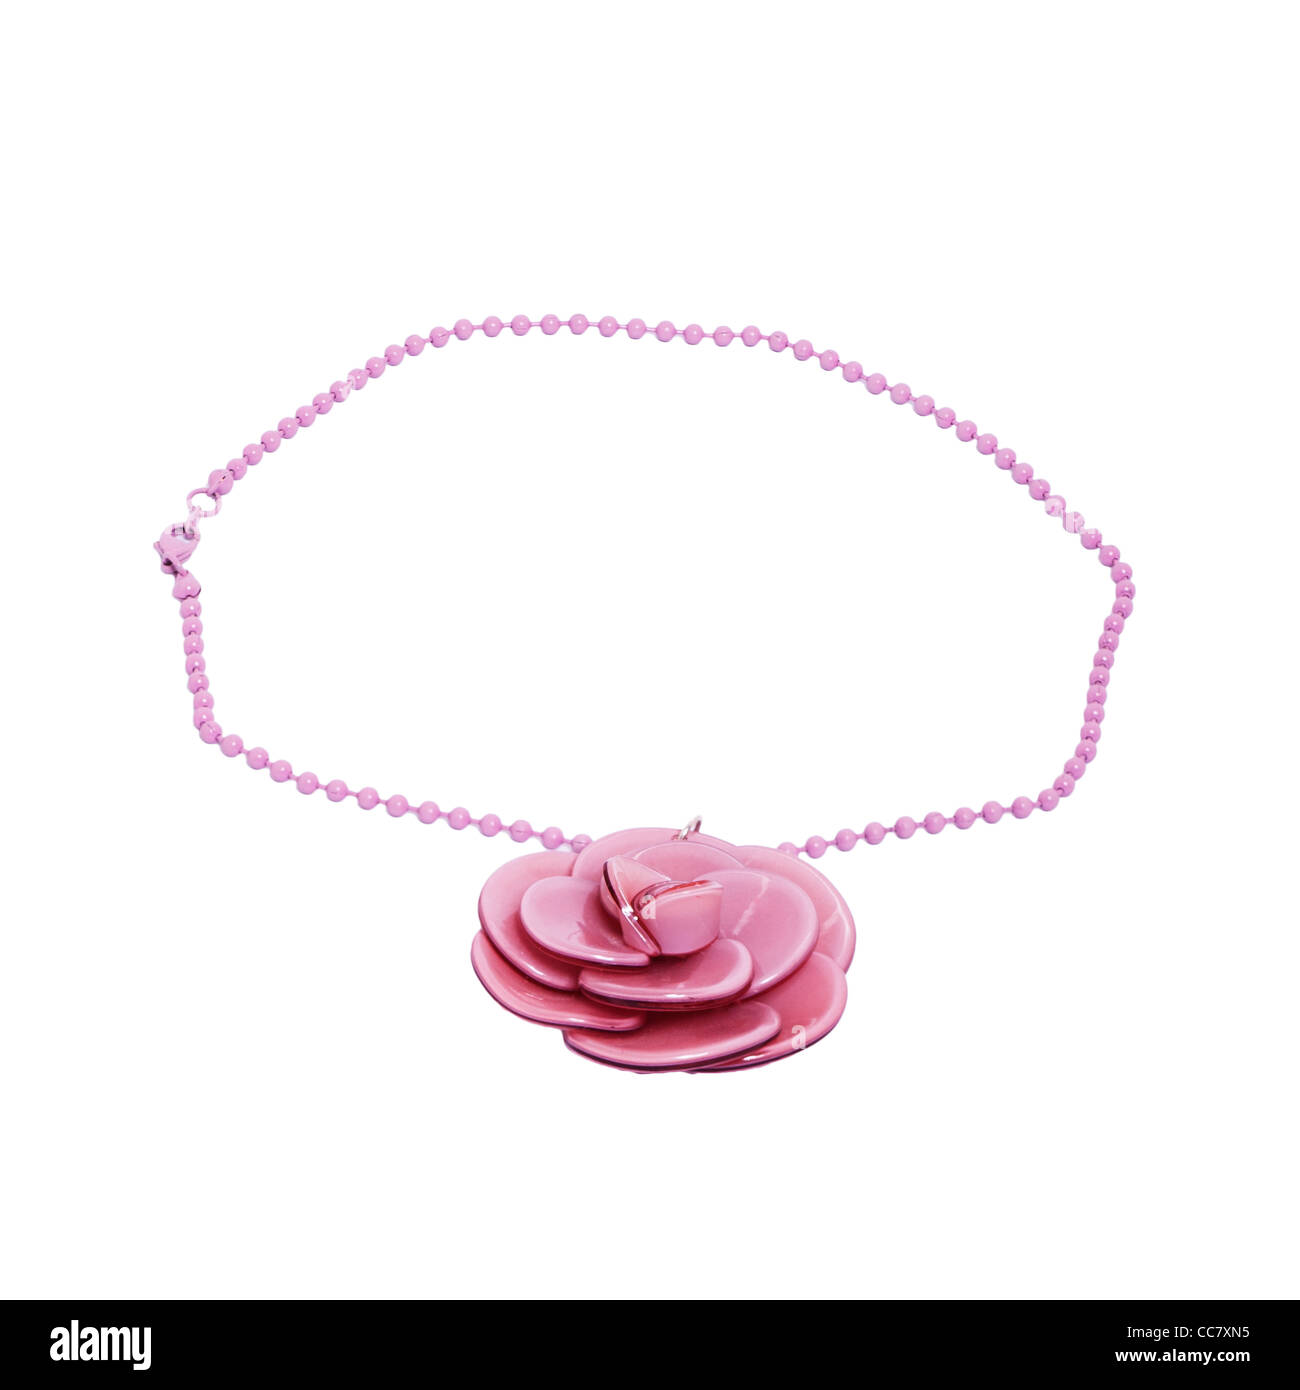 A rose shape necklace on a white background Stock Photo